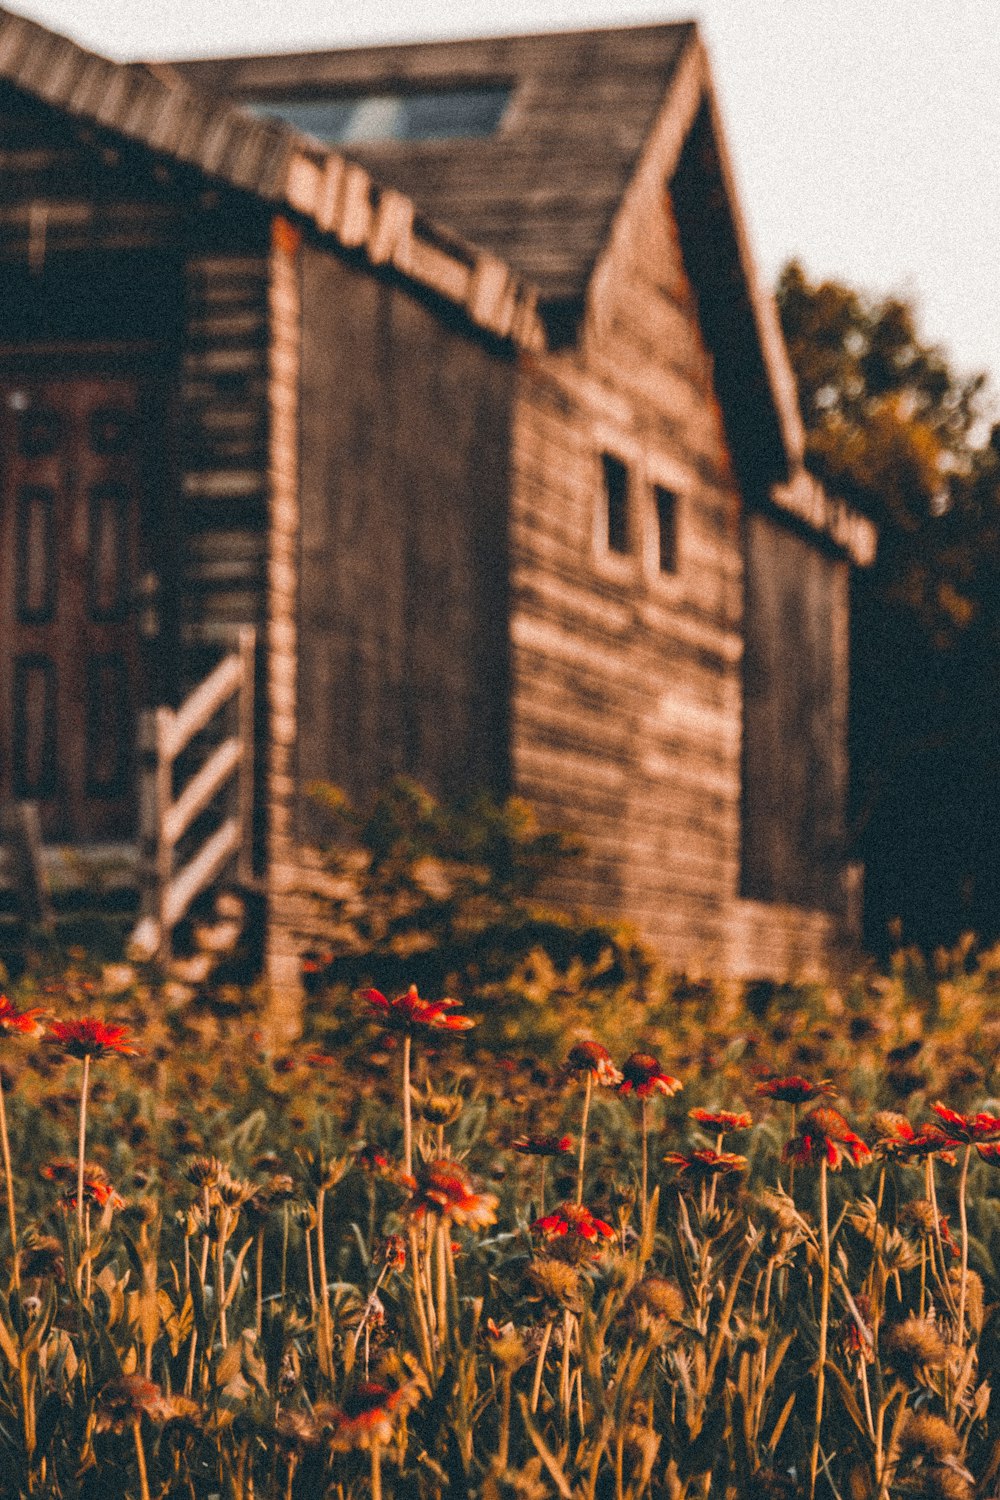 red flowers in front of brown concrete house